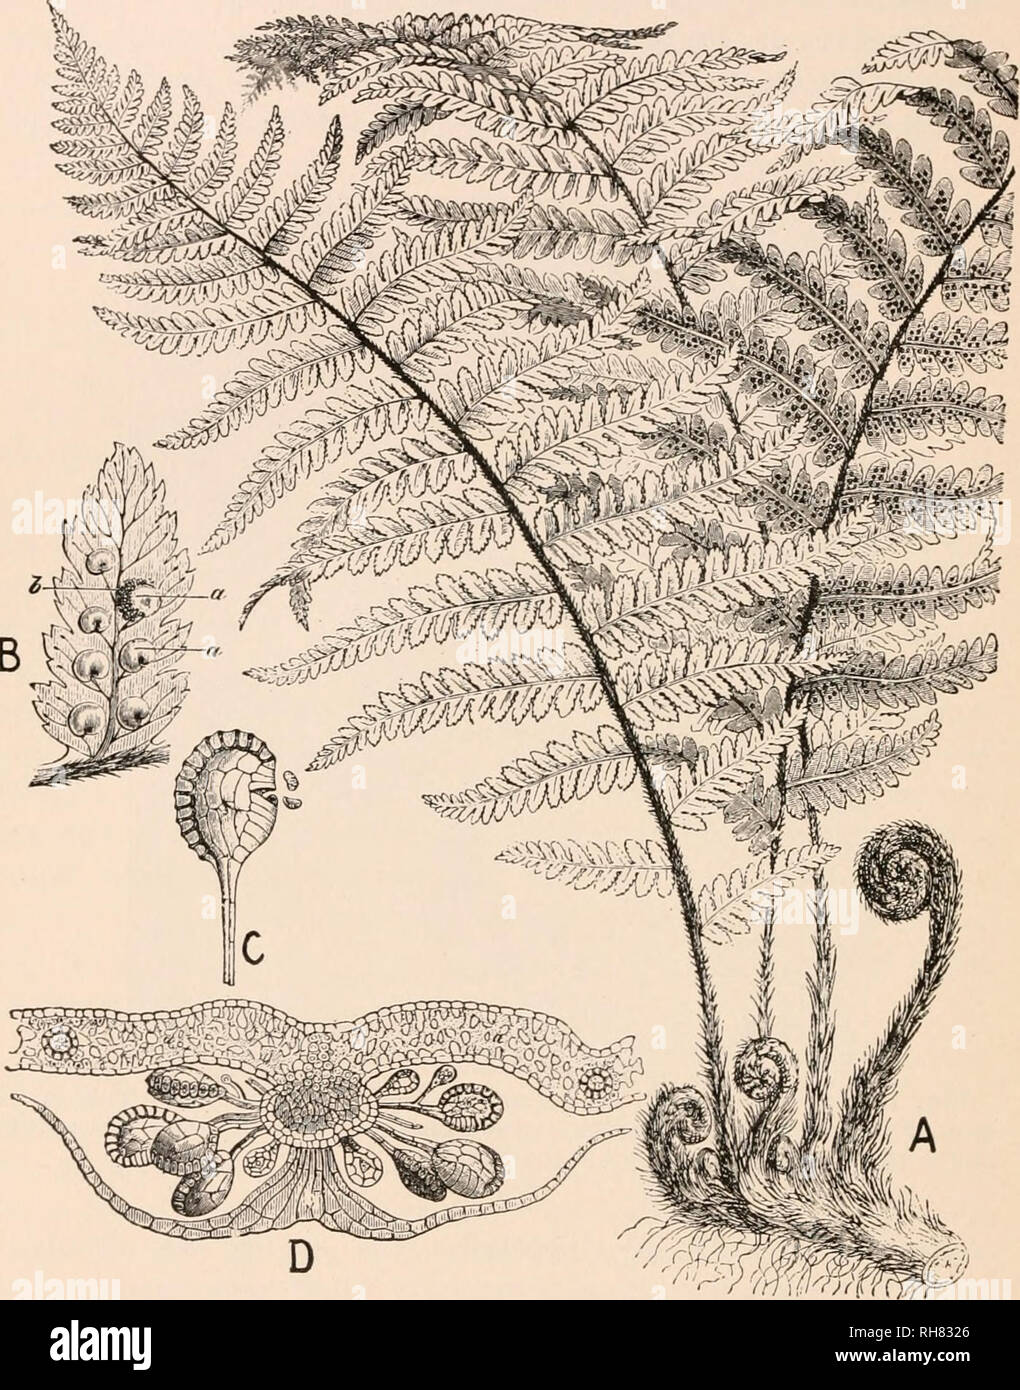 . Botany; principles and problems. Botany. 328 BOTANY: PRINCIPLES AND PROBLEMS. Fig. 199.—The structure of a fern (Aspidium). A, the. plant as a whole. B, portion of leaf with seven fruiting dots or sori on its lower surface. Each is covered by an indusium (a), from under which the sporangia (6) are protruding, in one case. C, a single sporangium. D, transverse section through a sorus, showing section of leaf-blade above and of indusium below, with cluster of sporangia attached between them. {From Strasburger, after Wossidlo).. Please note that these images are extracted from scanned page imag Stock Photo